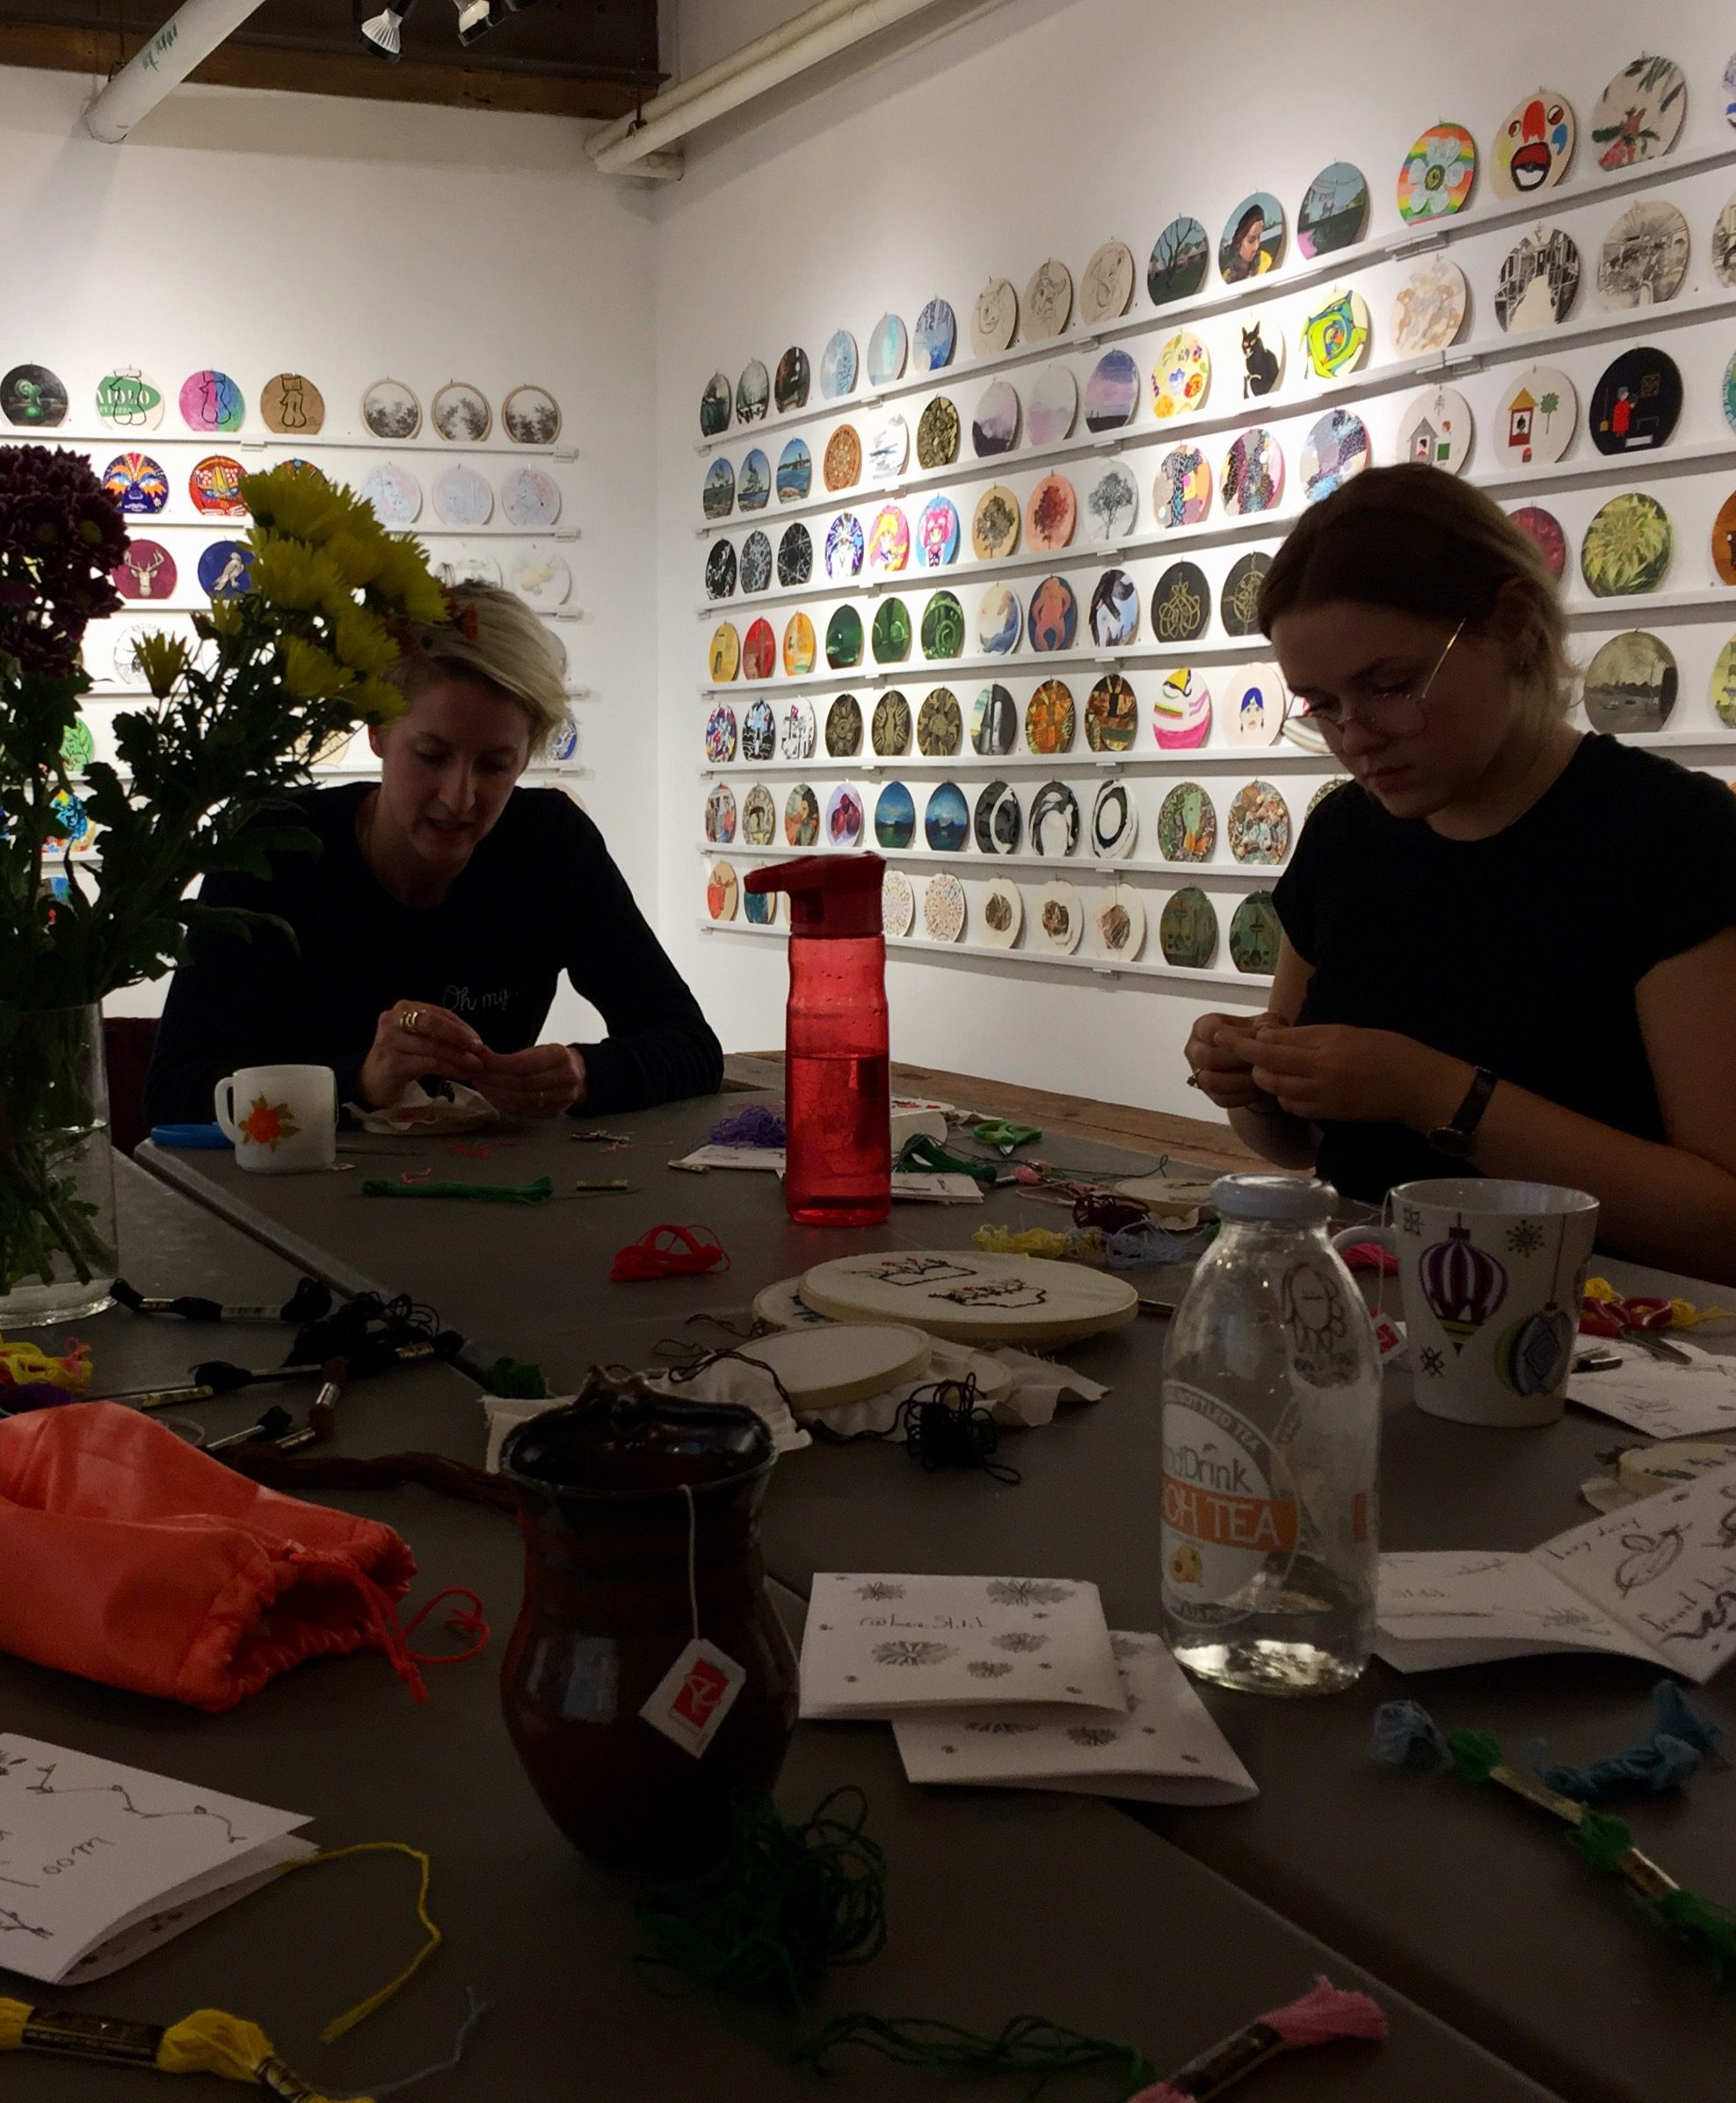 Two women in workshop stitching surrounded by art